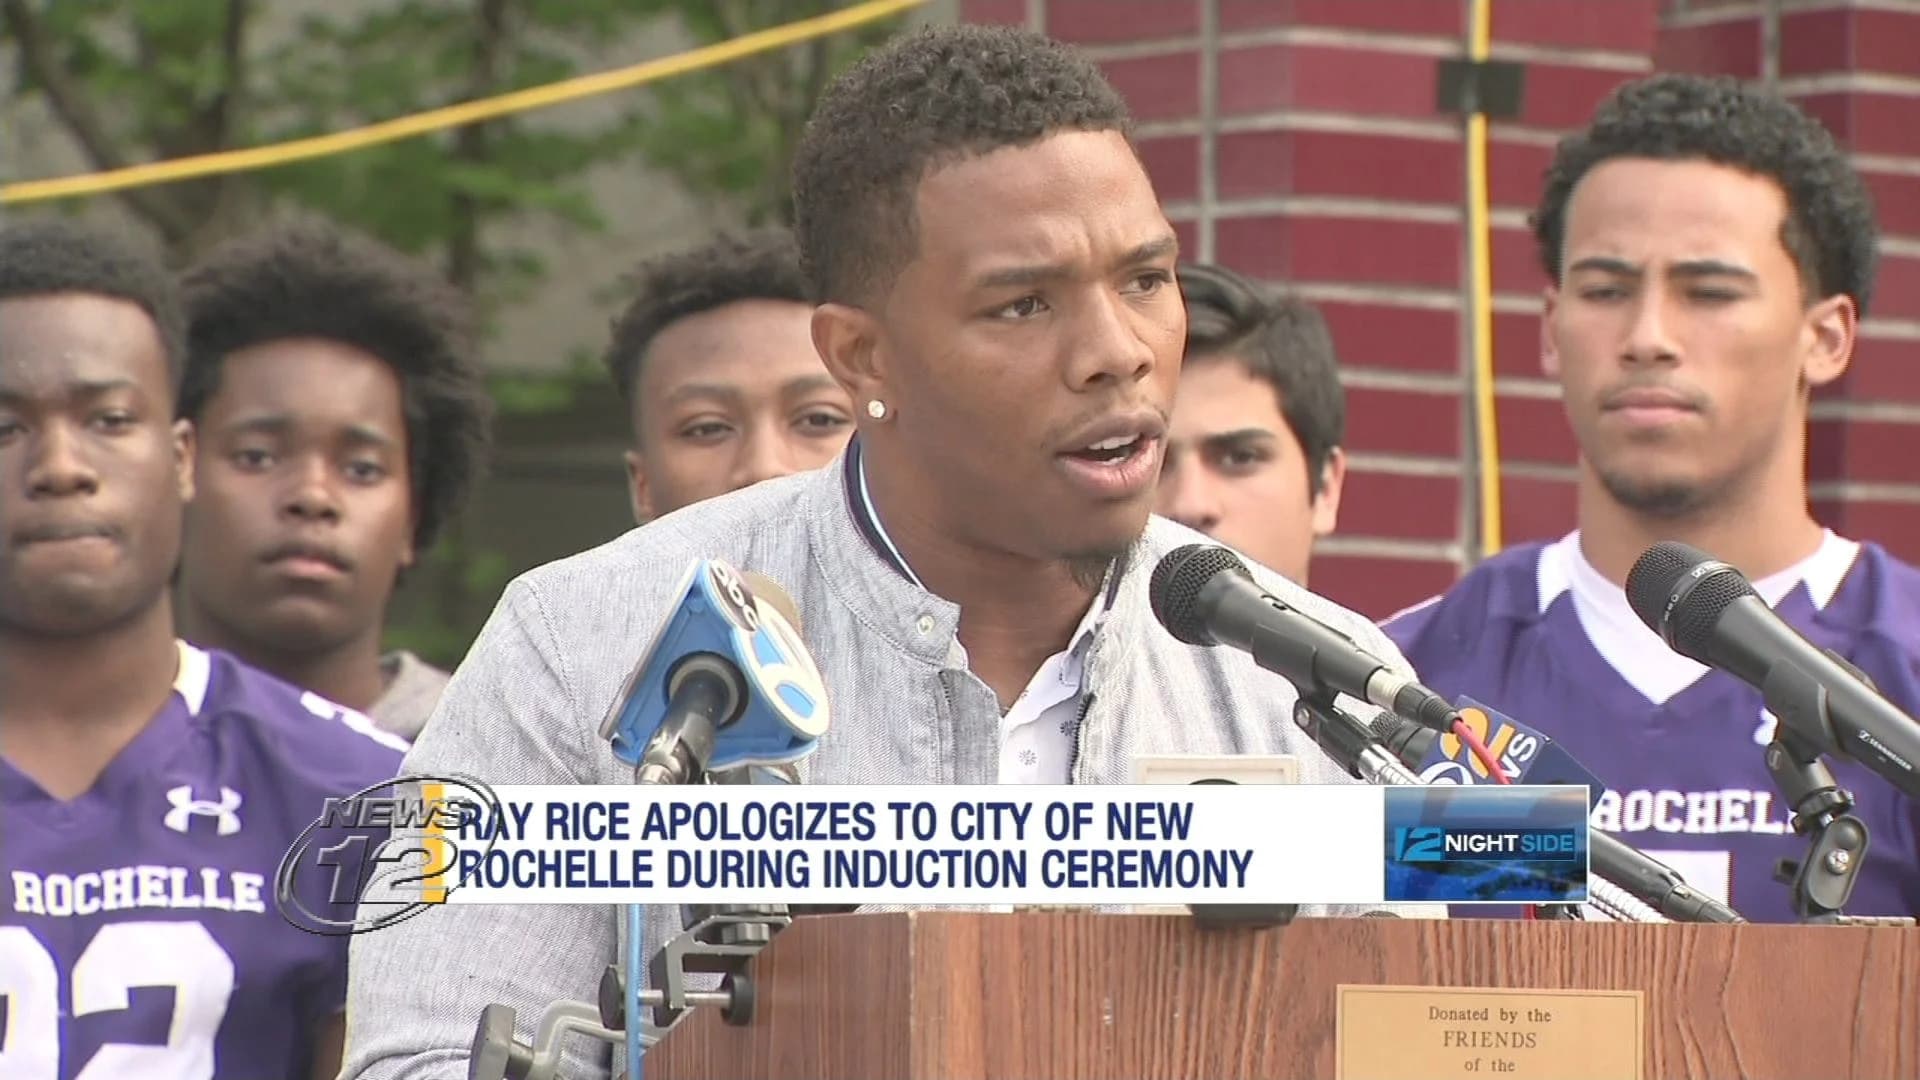 Ray Rice apologizes to city at New Rochelle Walk of Fame ceremony